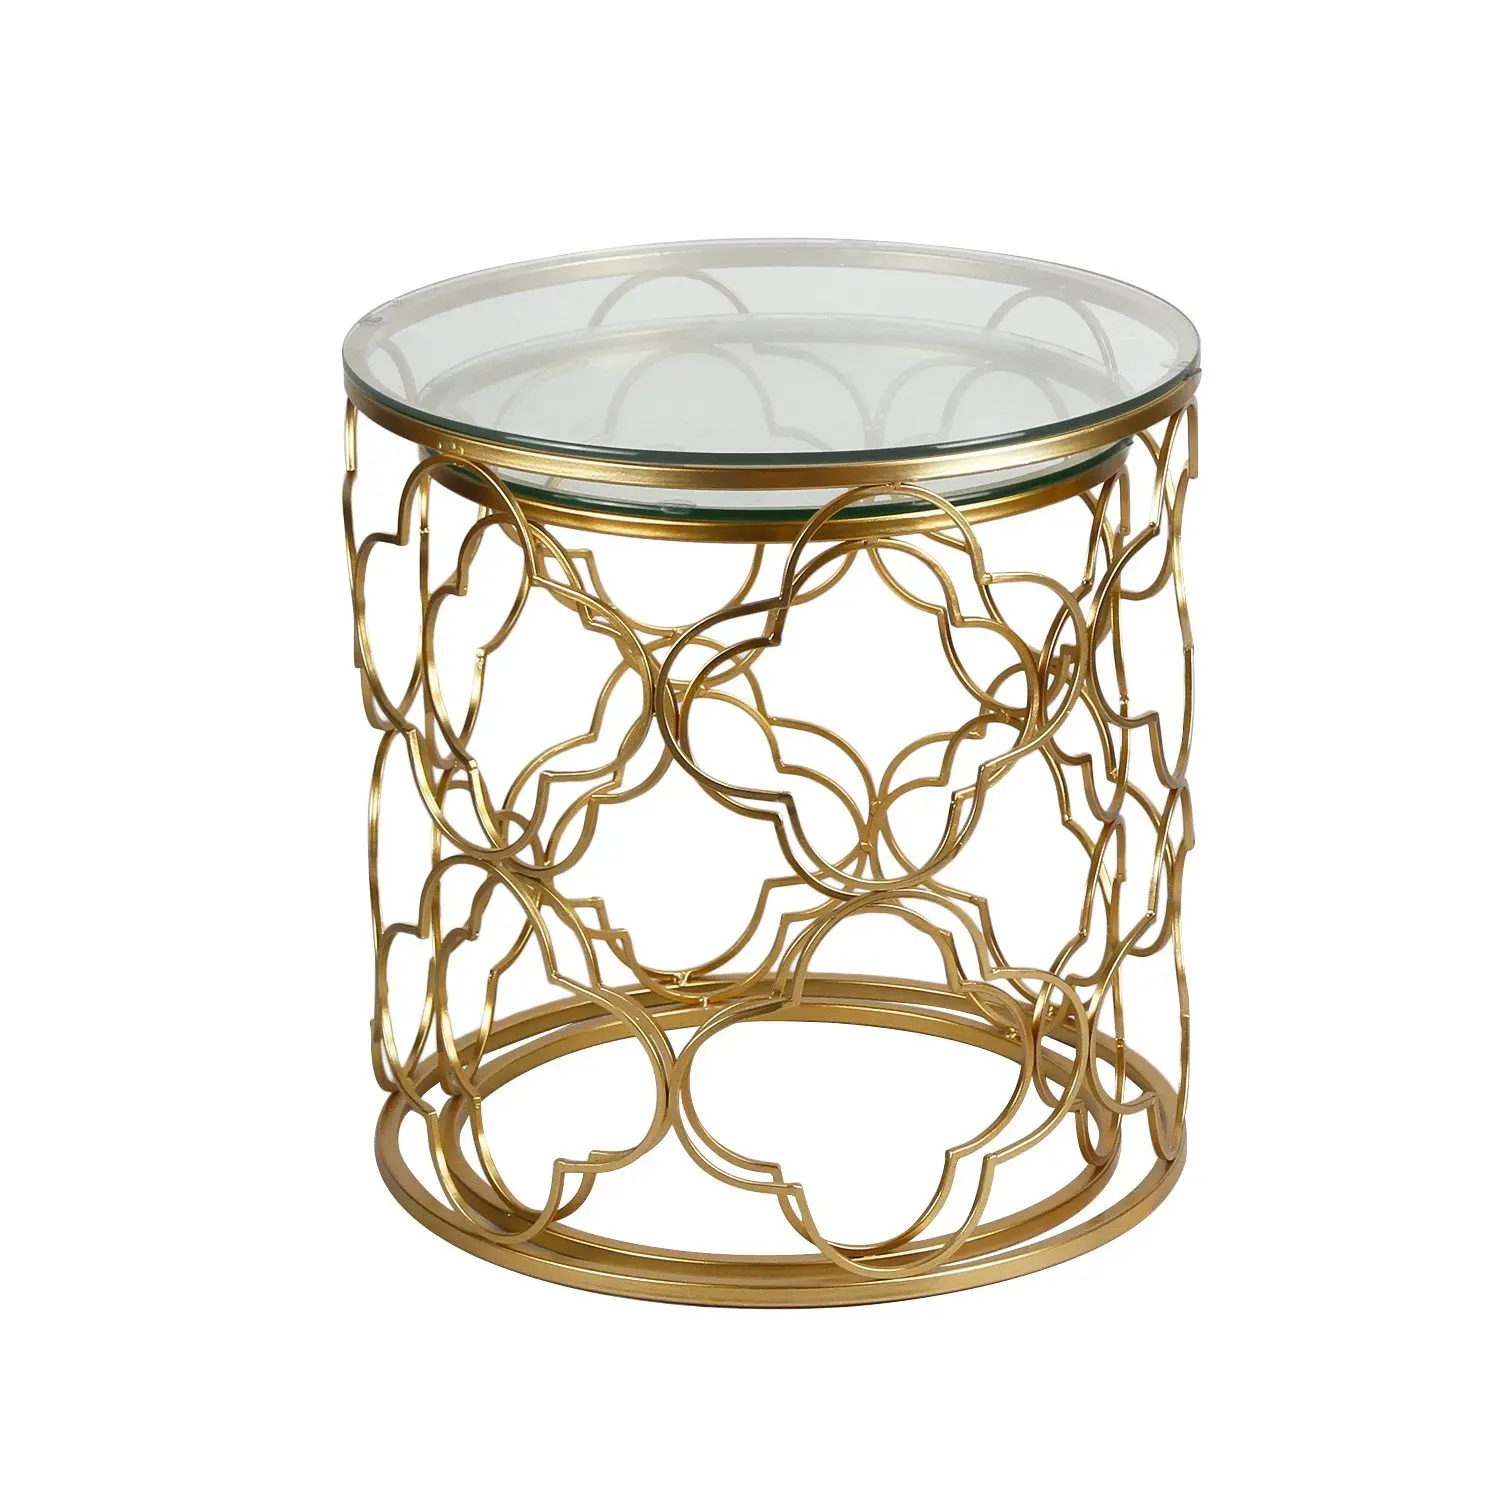 Gold End Table With Glass Top in Decorative